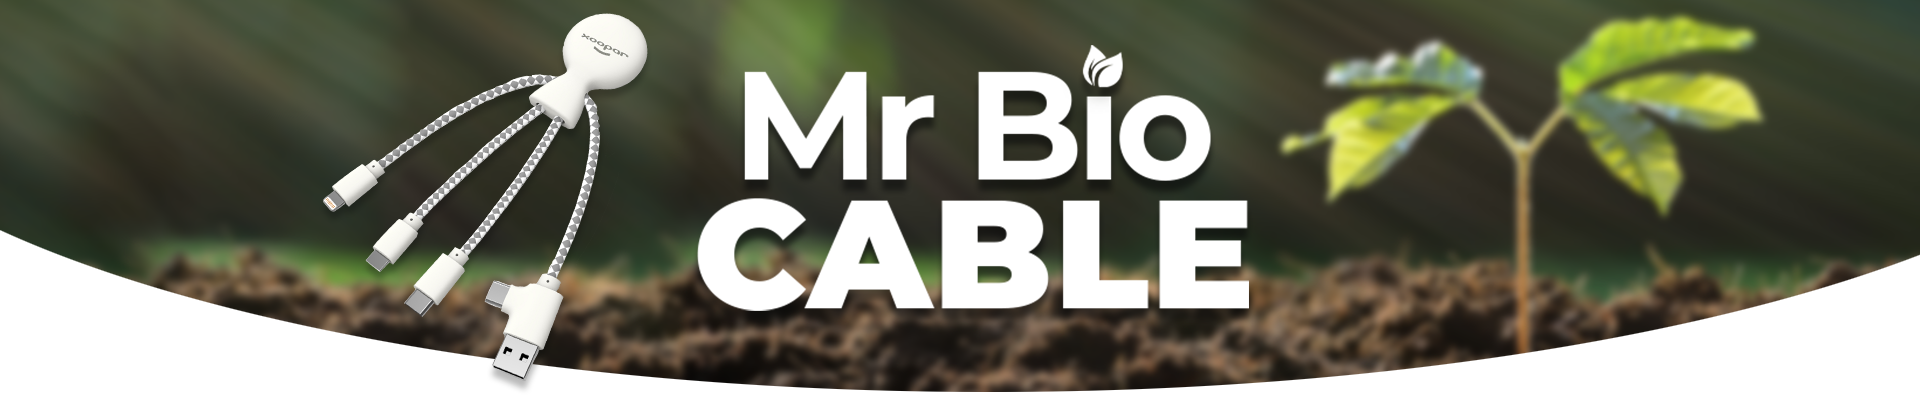 Mr-Bio-Cable-header.png